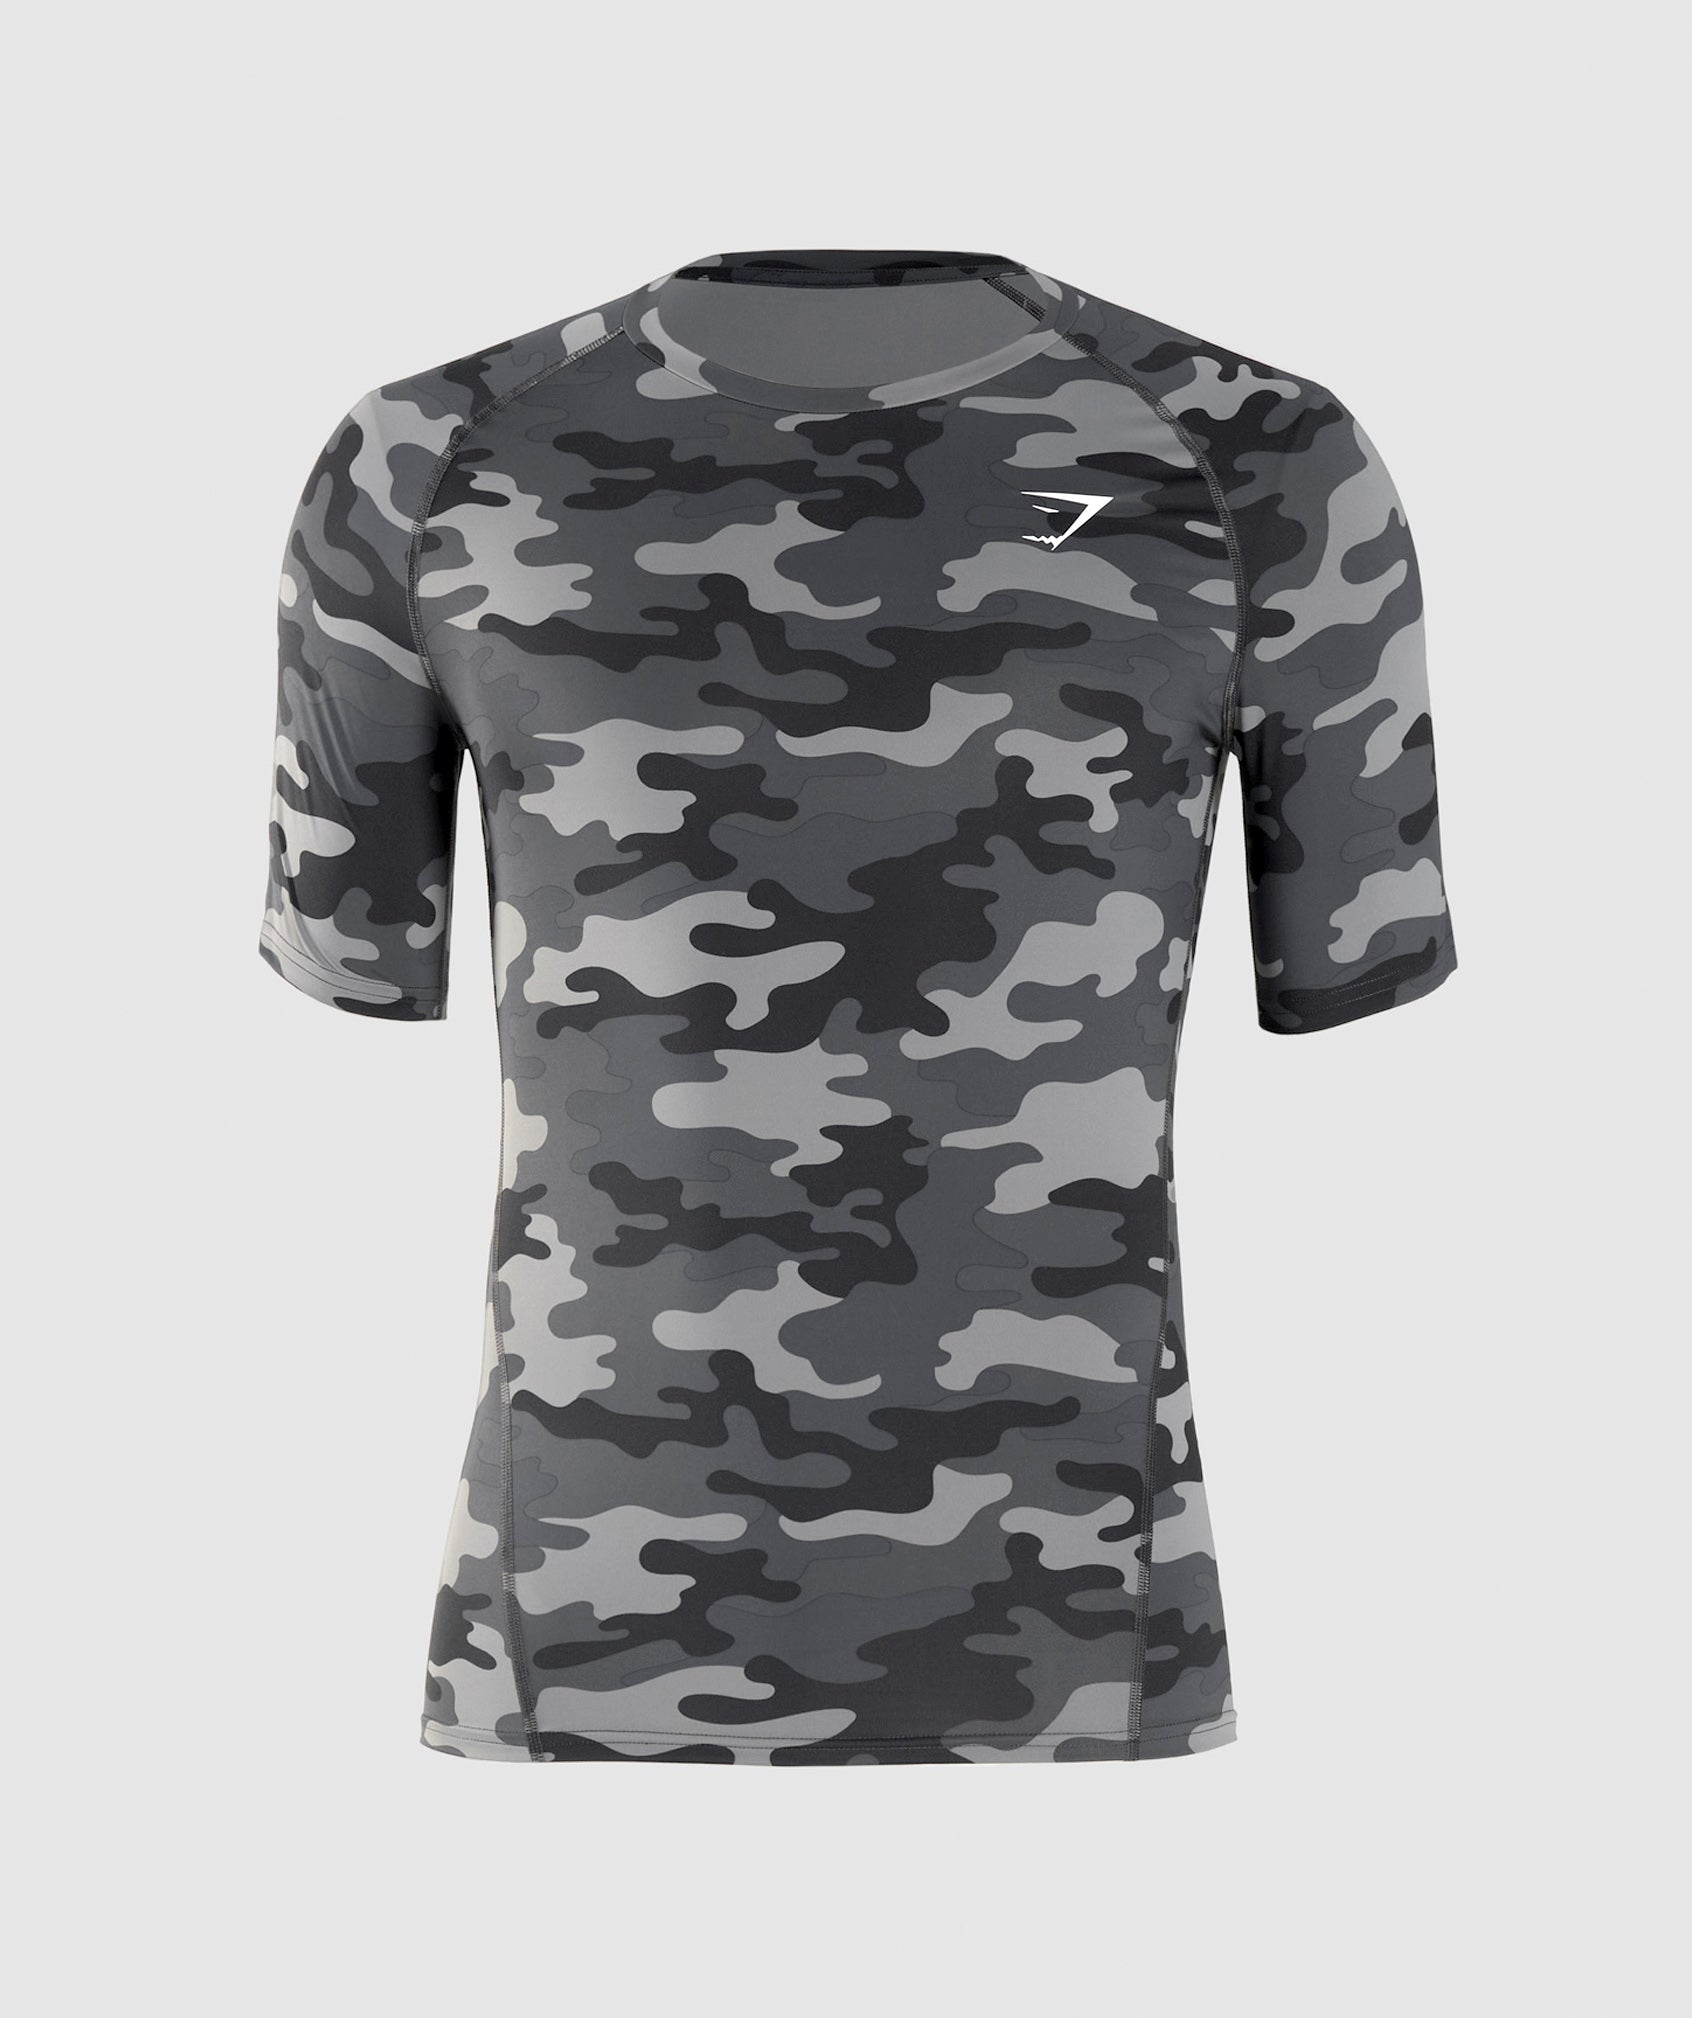 Element Baselayer T-Shirt in Camo Grey Print - view 3